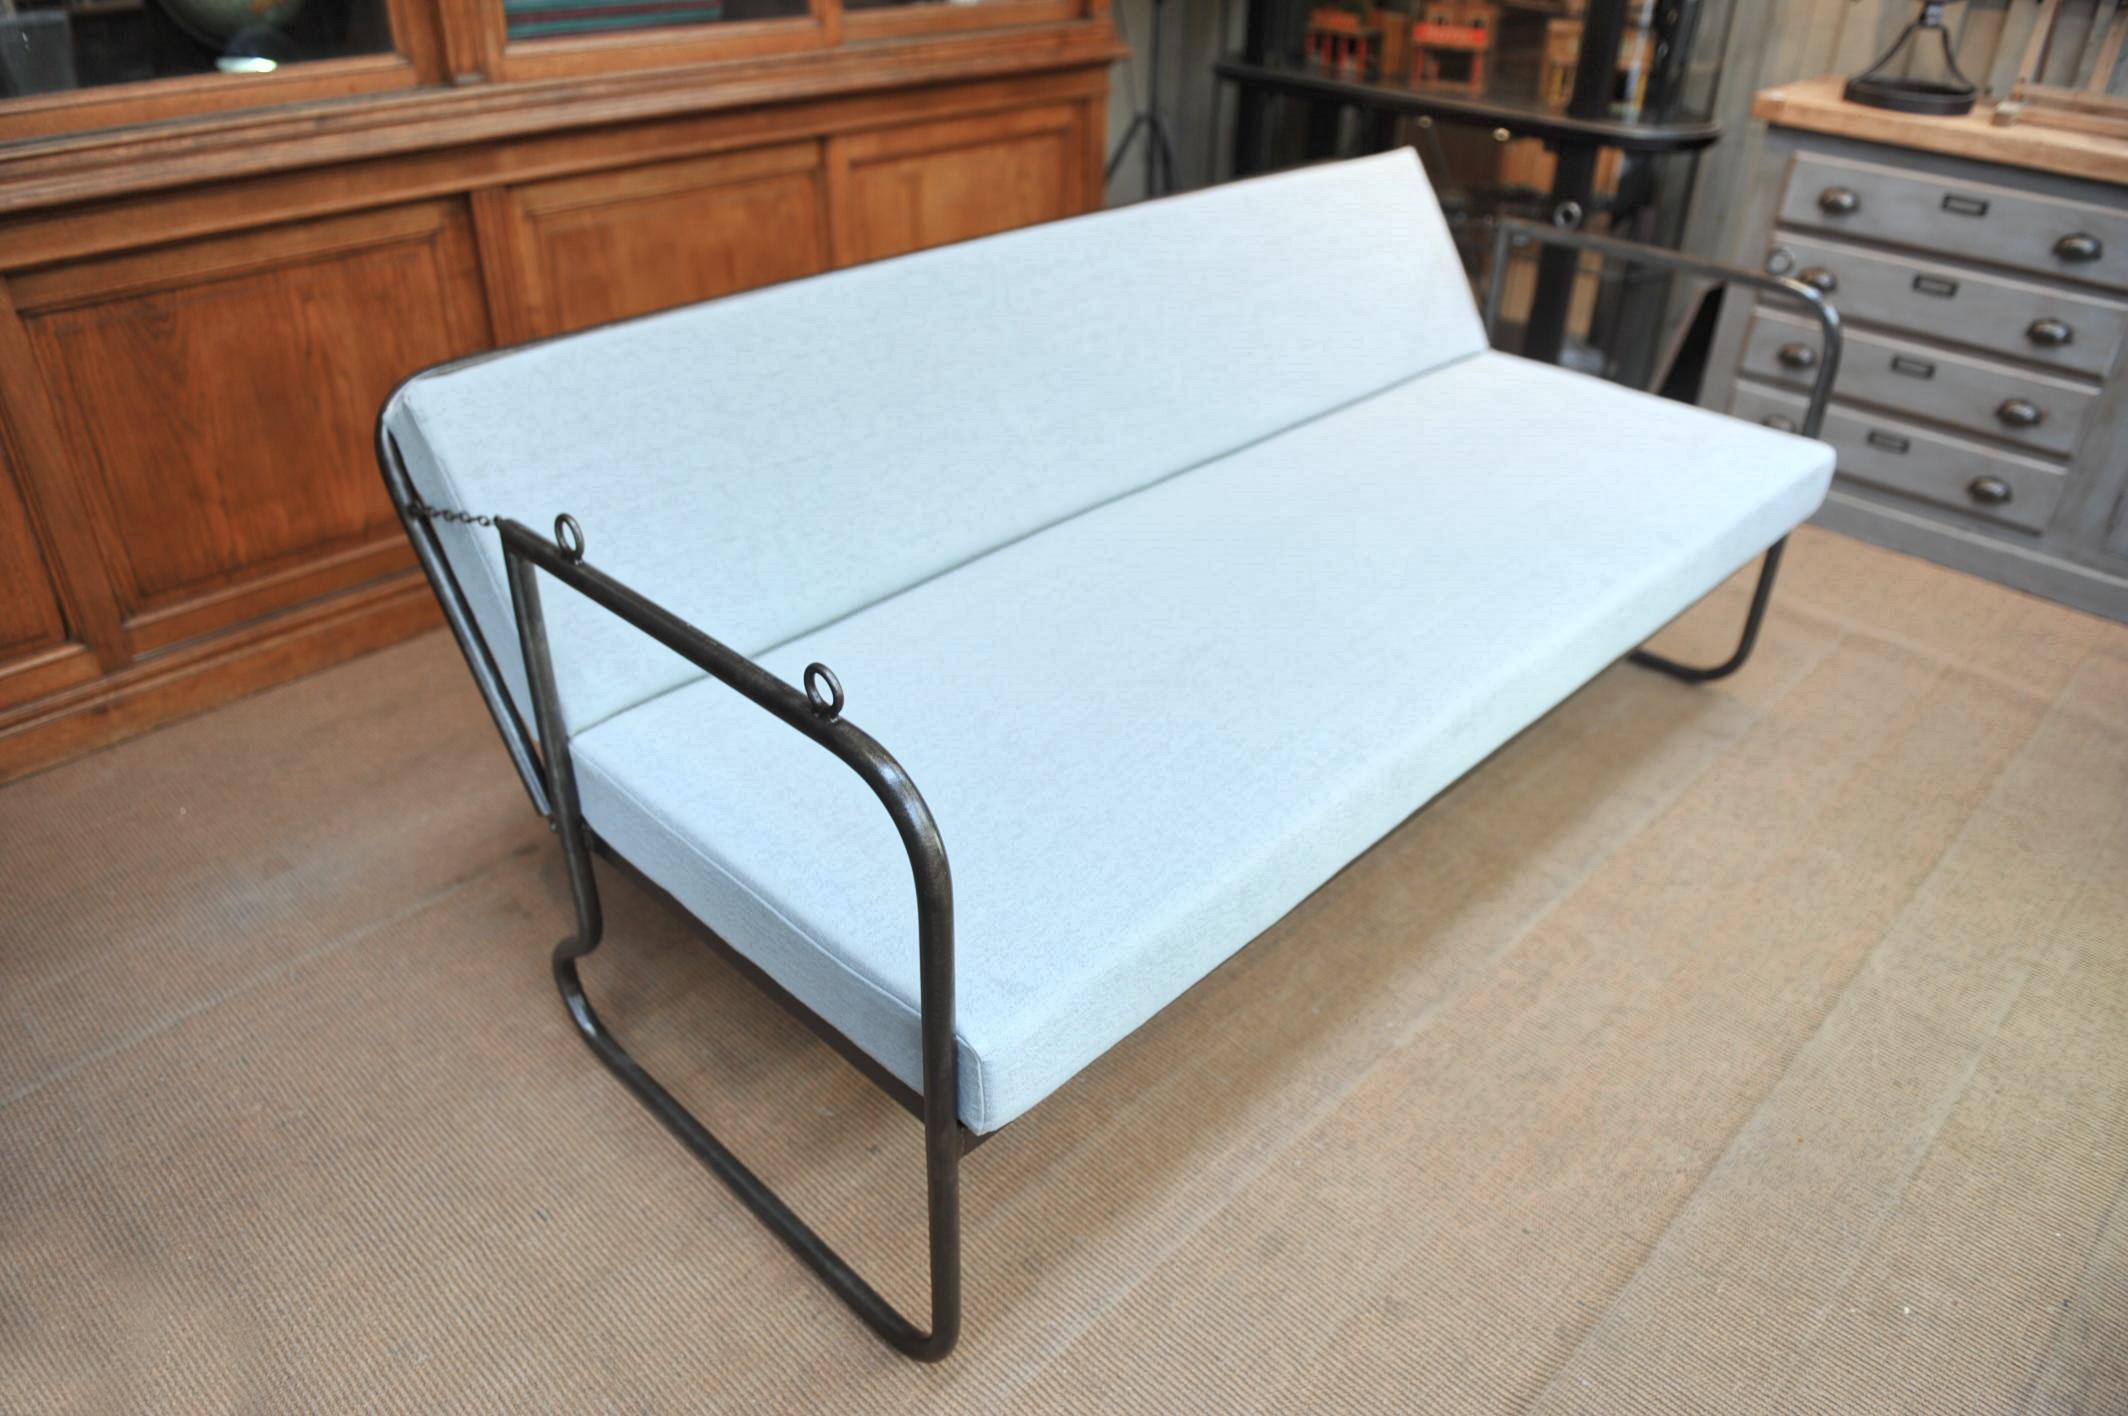 French Mesh Iron Sofa or Daybed , Double Folding System, 1920s, Reupholstered 1